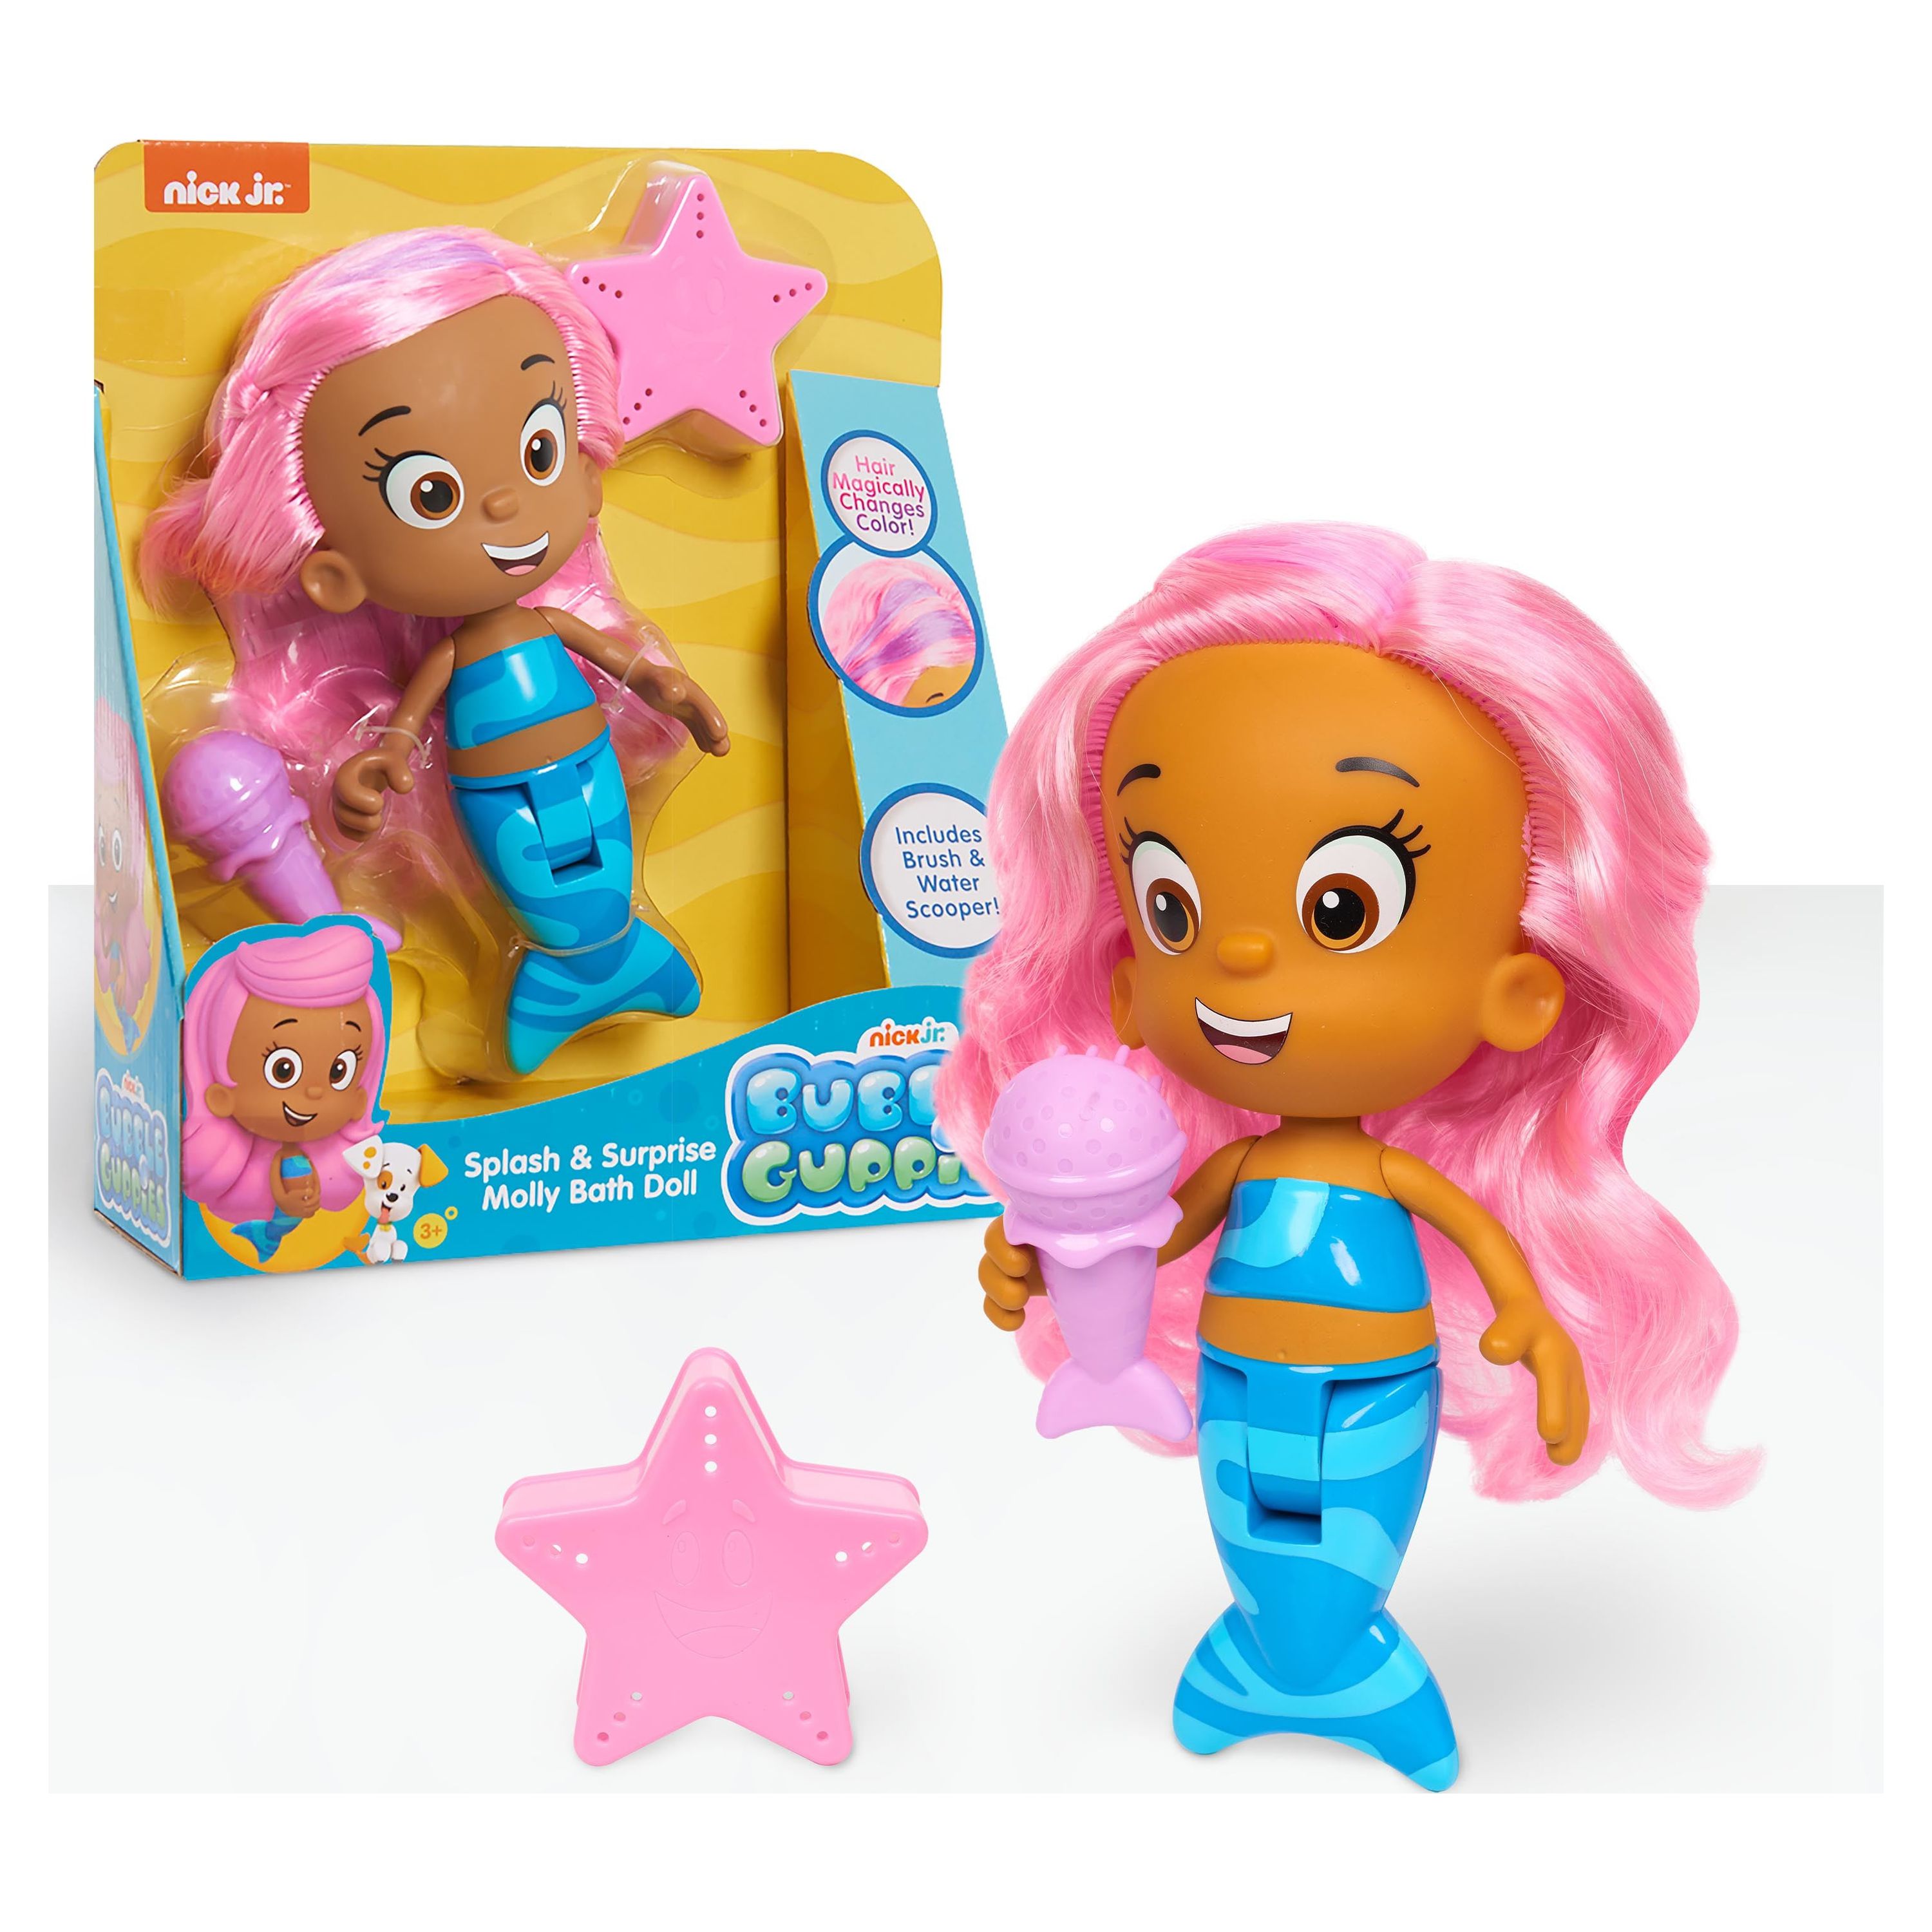 Bubble Guppies Splash and Surprise Molly Bath Doll,  Kids Toys for Ages 3 Up, Gifts and Presents - image 1 of 5